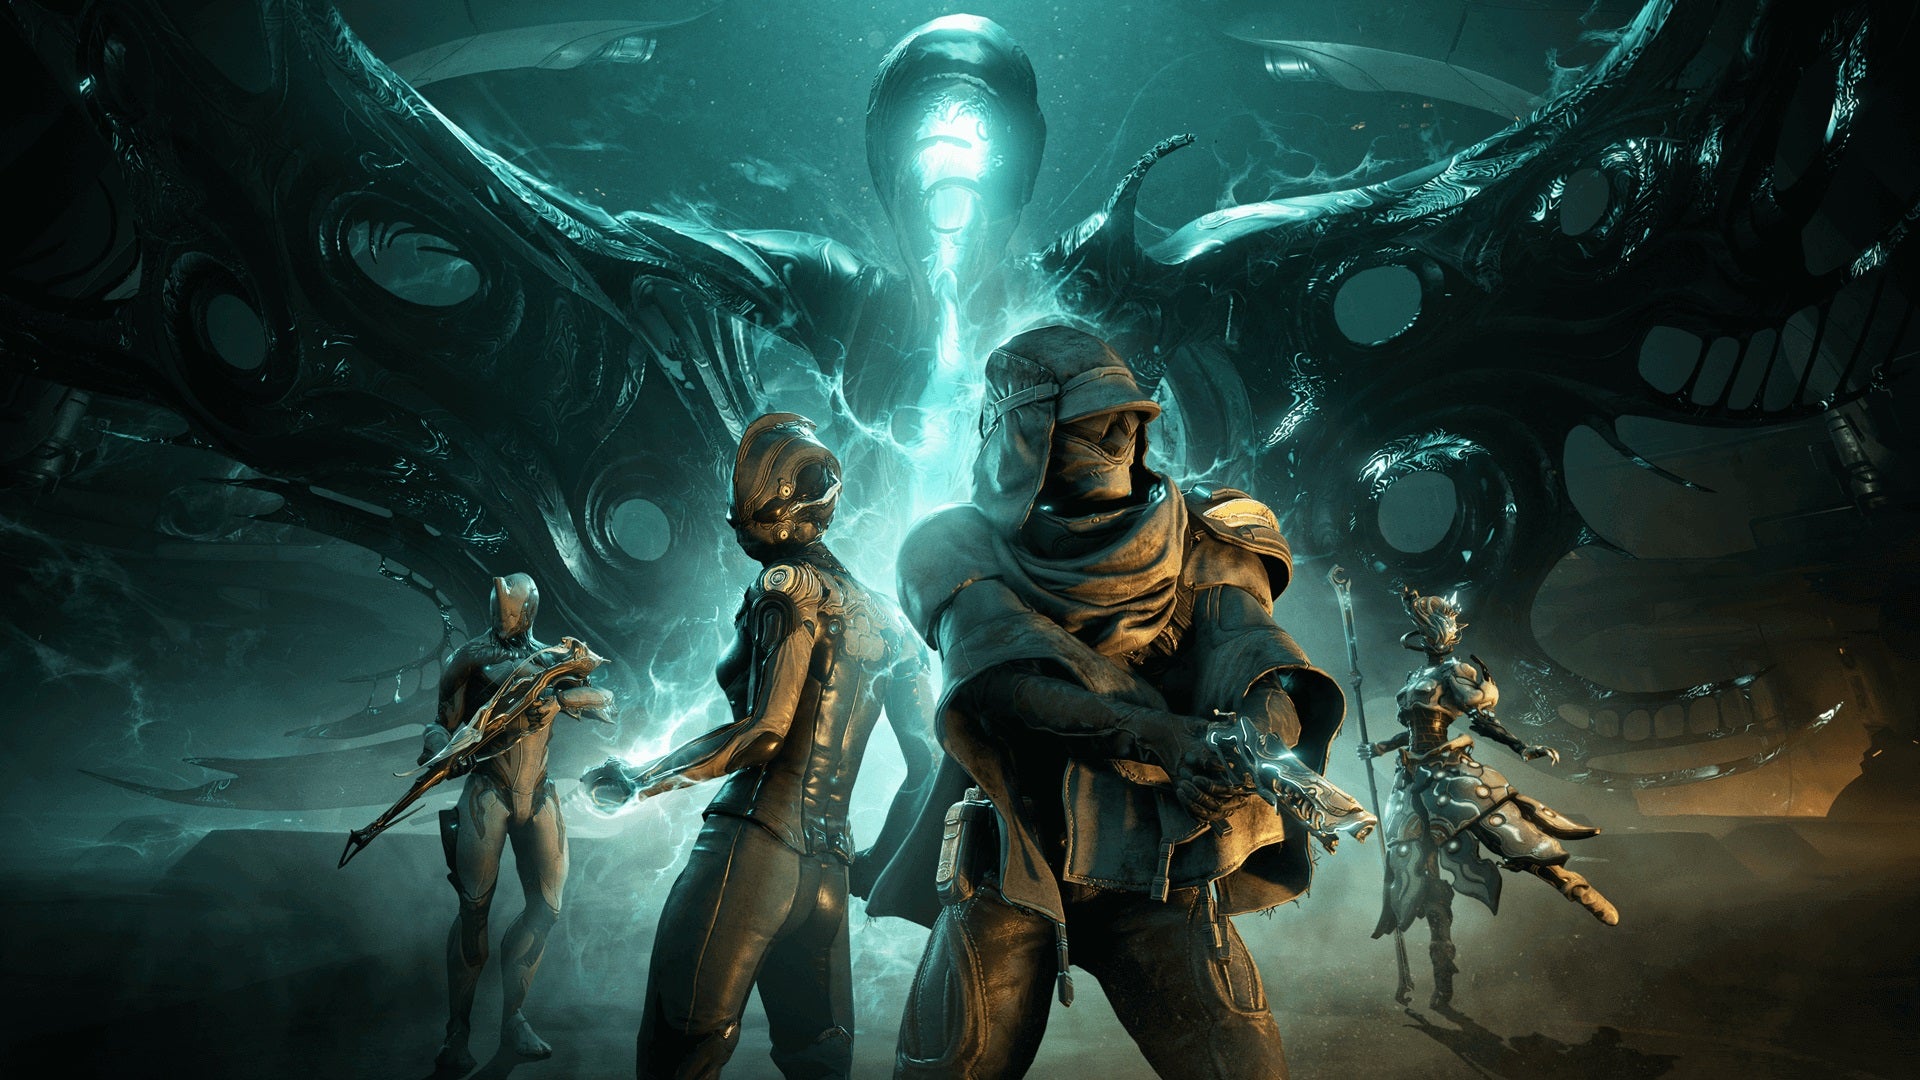 The header image for the Zariman update, with the new Warframe, the player, as well as a mysterious stranger in the foreground.